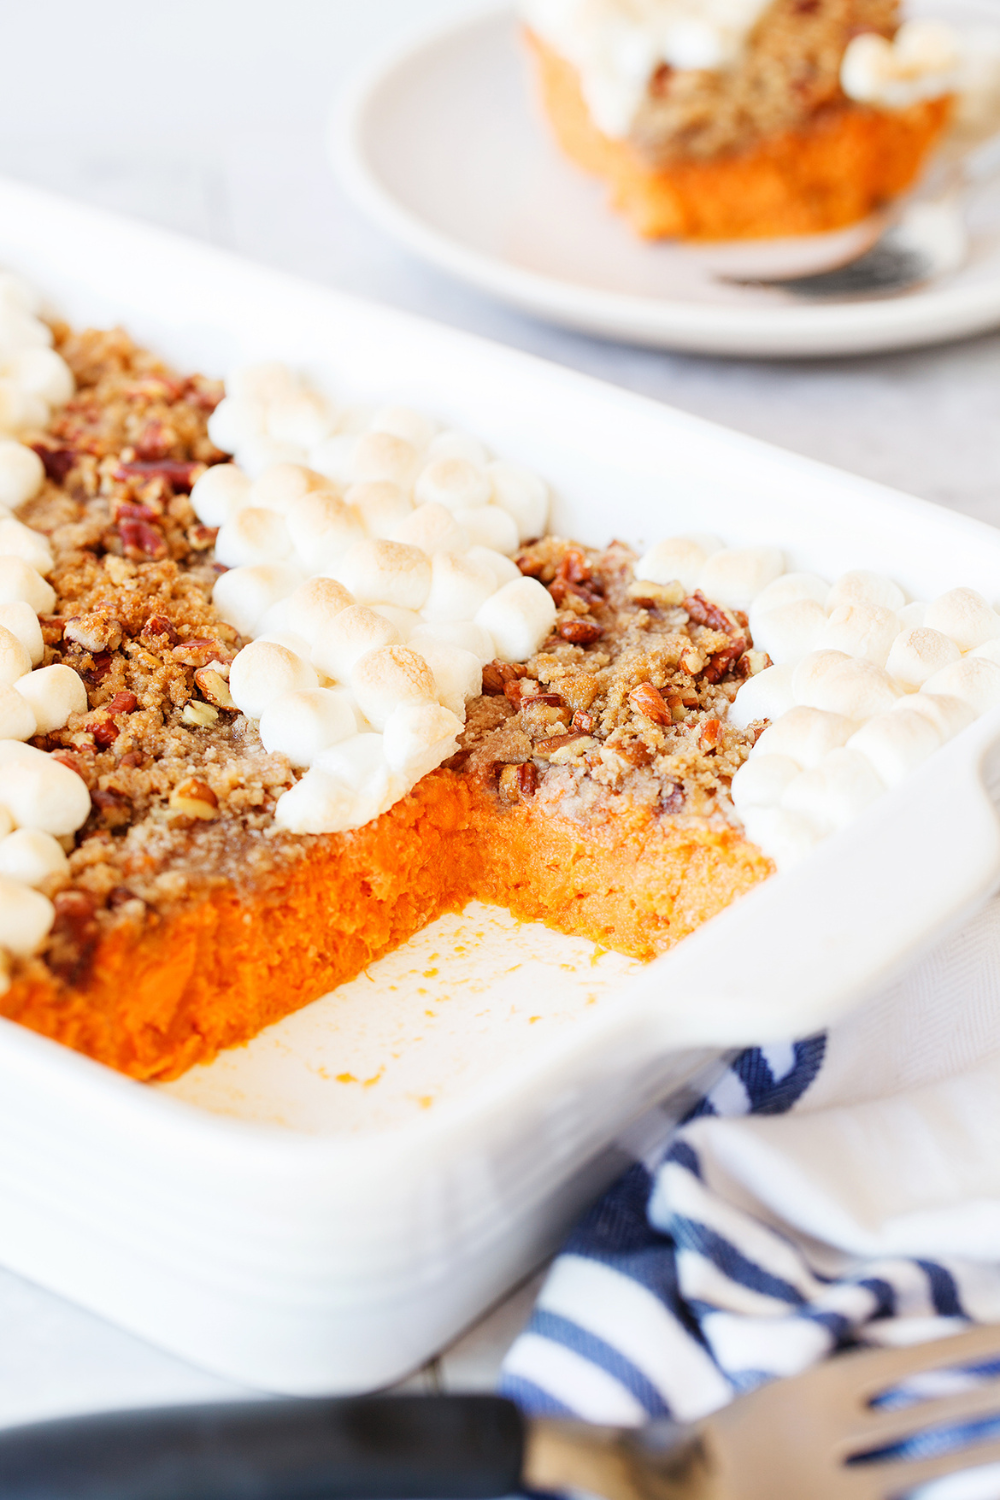 this Crowd-Pleasing Sweet Potato Casserole with a slice removed, showing the pretty, vibrant orange sweet potatoes inside.